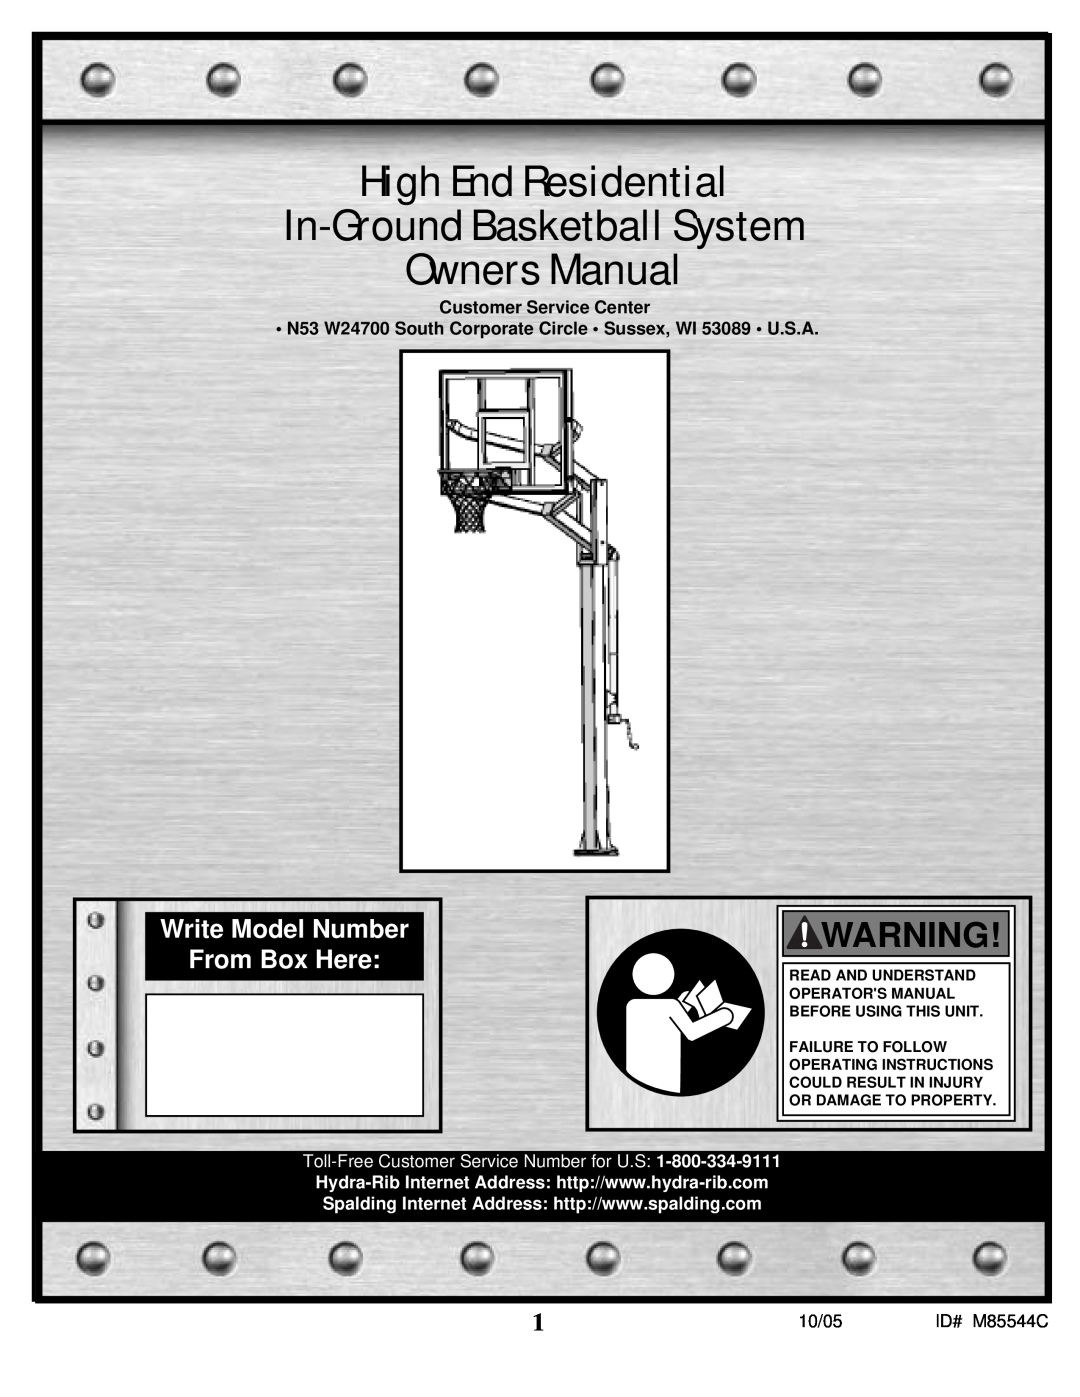 Spalding M85544C manual High End Residential In-Ground Basketball System Owners Manual, Write Model Number From Box Here 